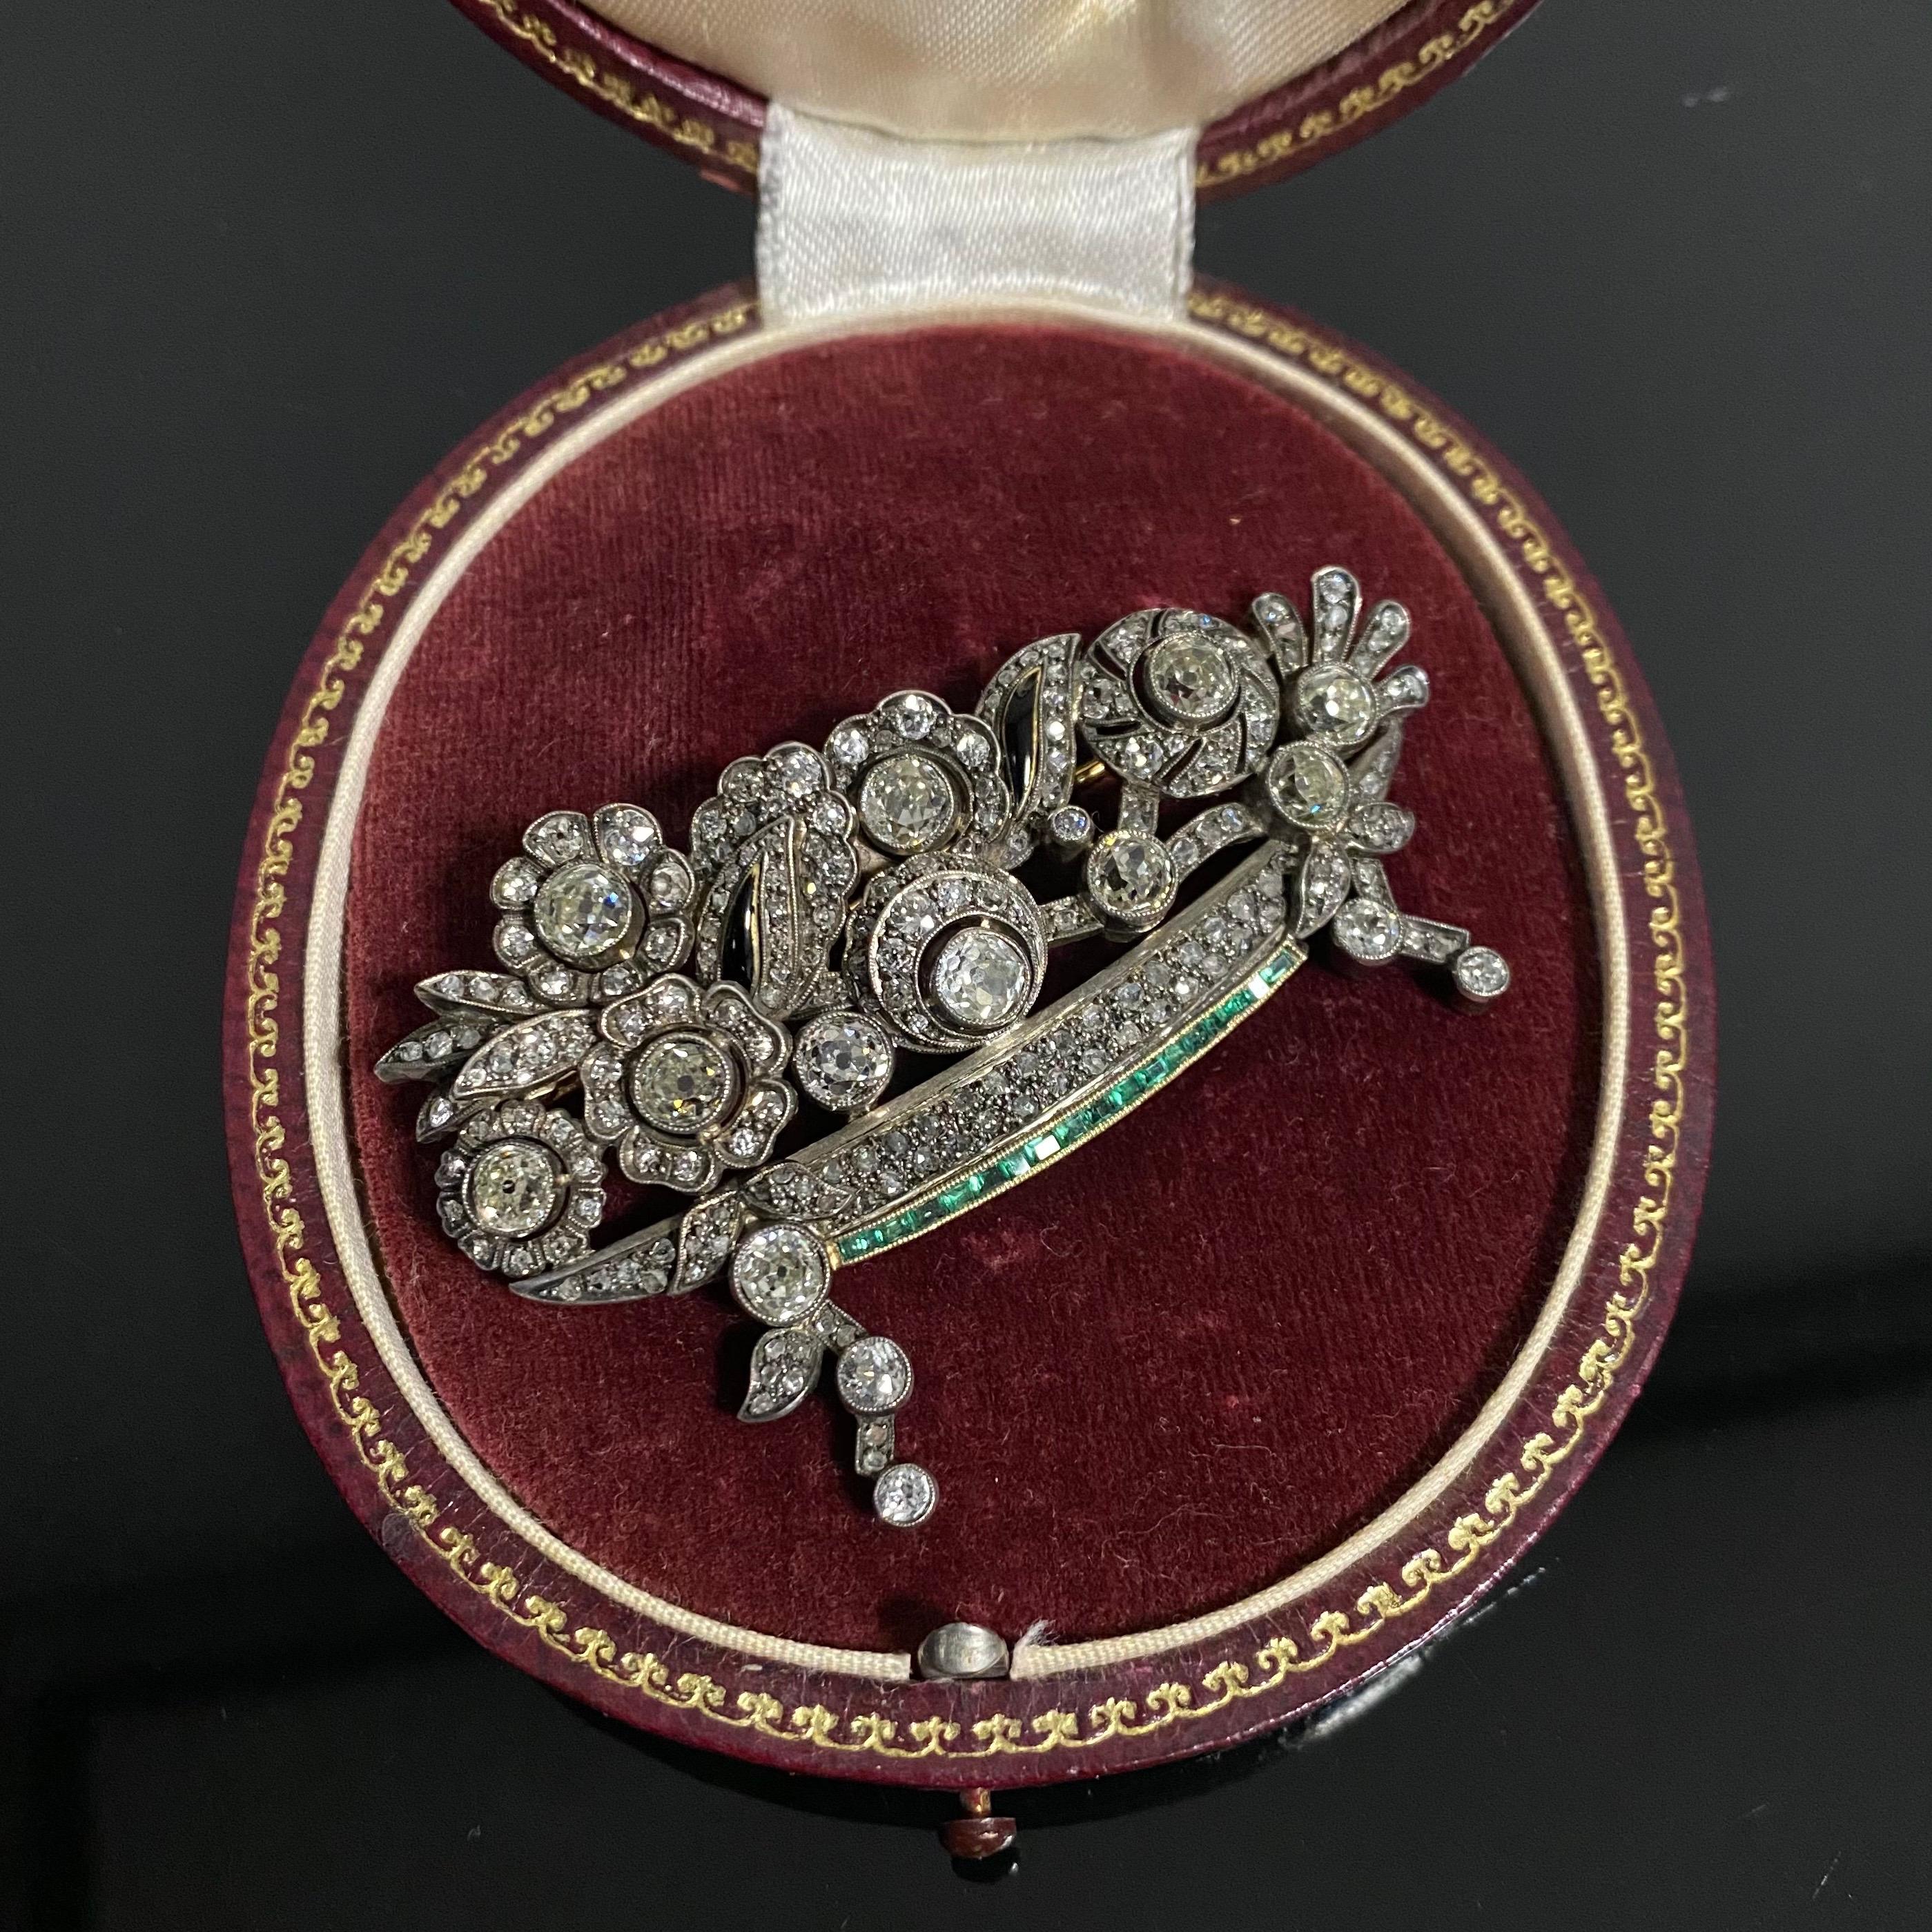 Art Deco Leitão & Irmão Diamond, Emerald and Enamel Giardinetto Floral Brooch in Silver and Gold, Portugal, c. 1940, in original case, with a total gem weight of approximately 7.84ct. Designed as a stylized openwork giardinetto, the flowers grain-